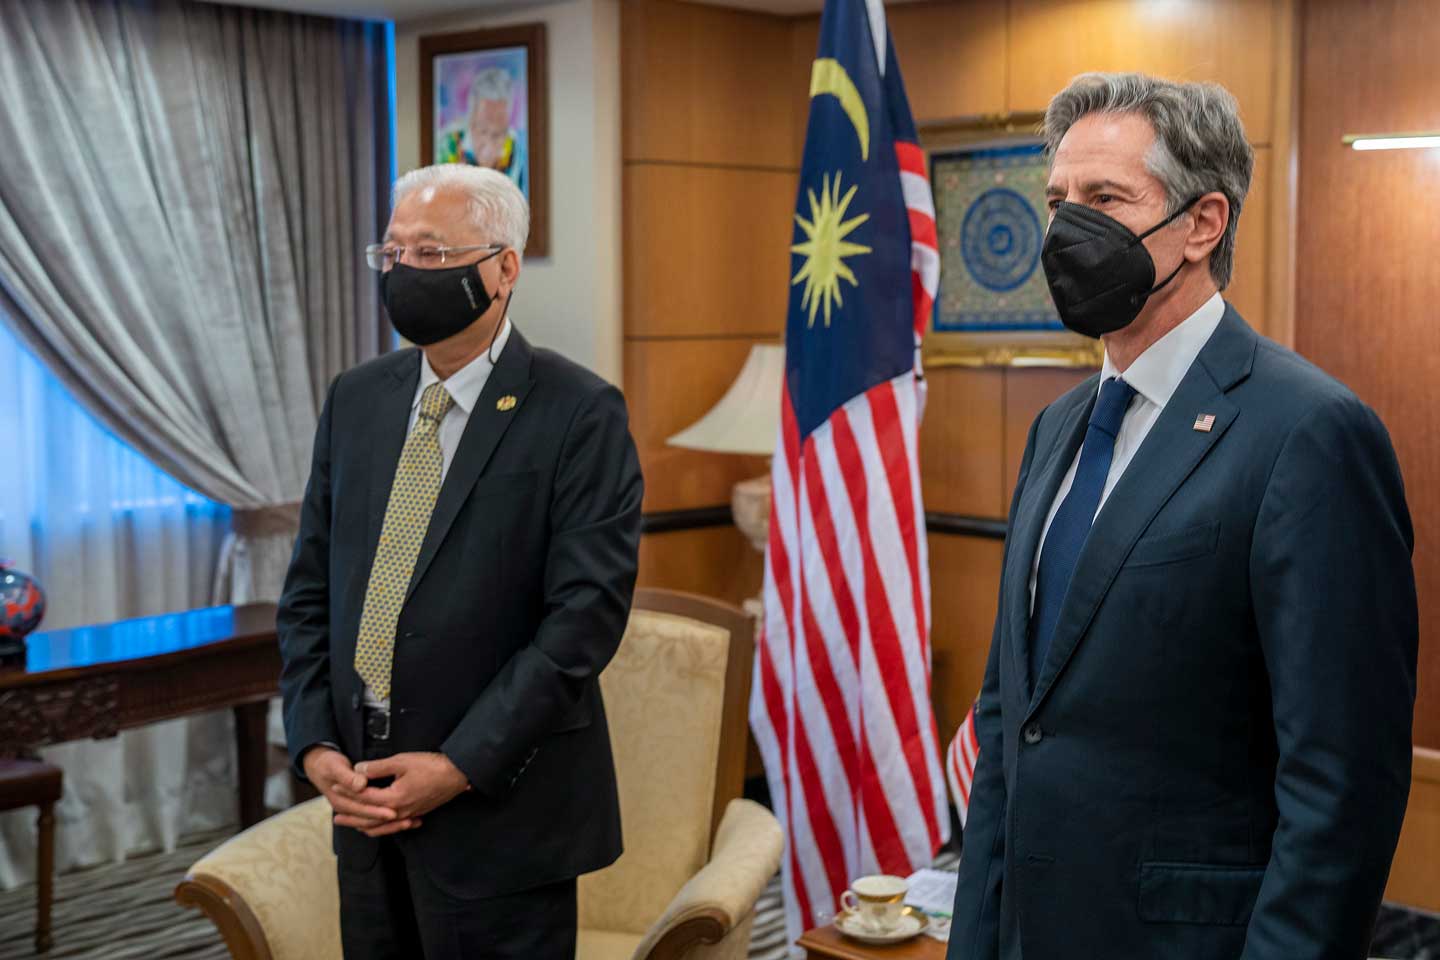 Malaysia’s New Prime Minister, Ismail Sabri Yaakob standing with US Secretary of State Antony Blinken